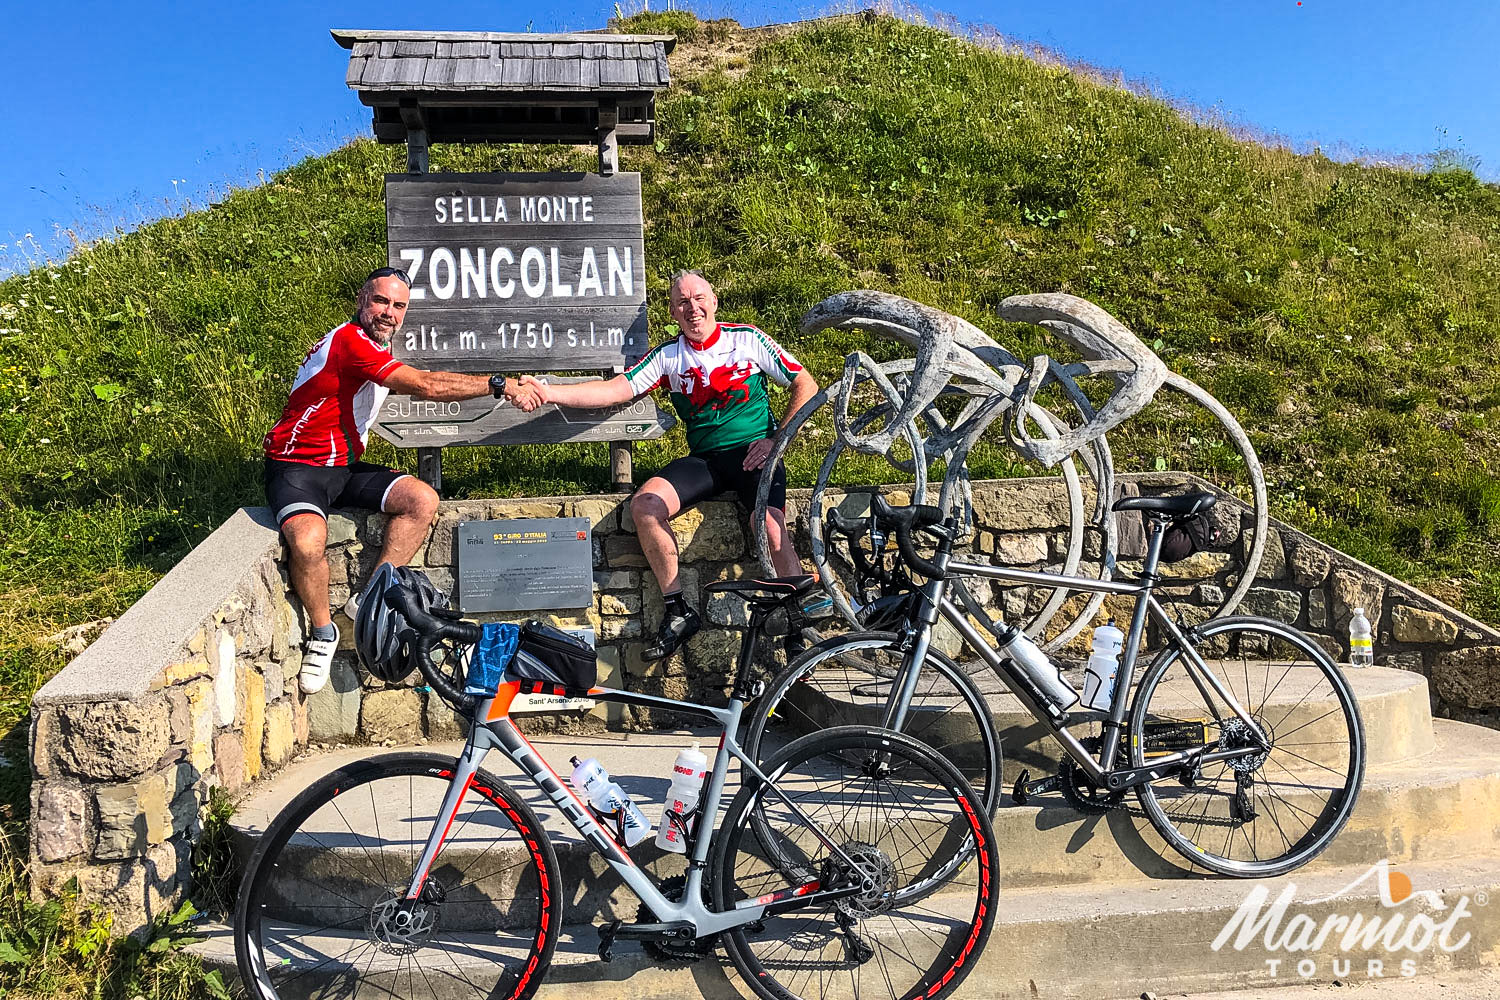 Pair of cyclists shaking hands at summit of Monte Zoncolan on Marmot Tours fully supported road cycling tour of Slovenia